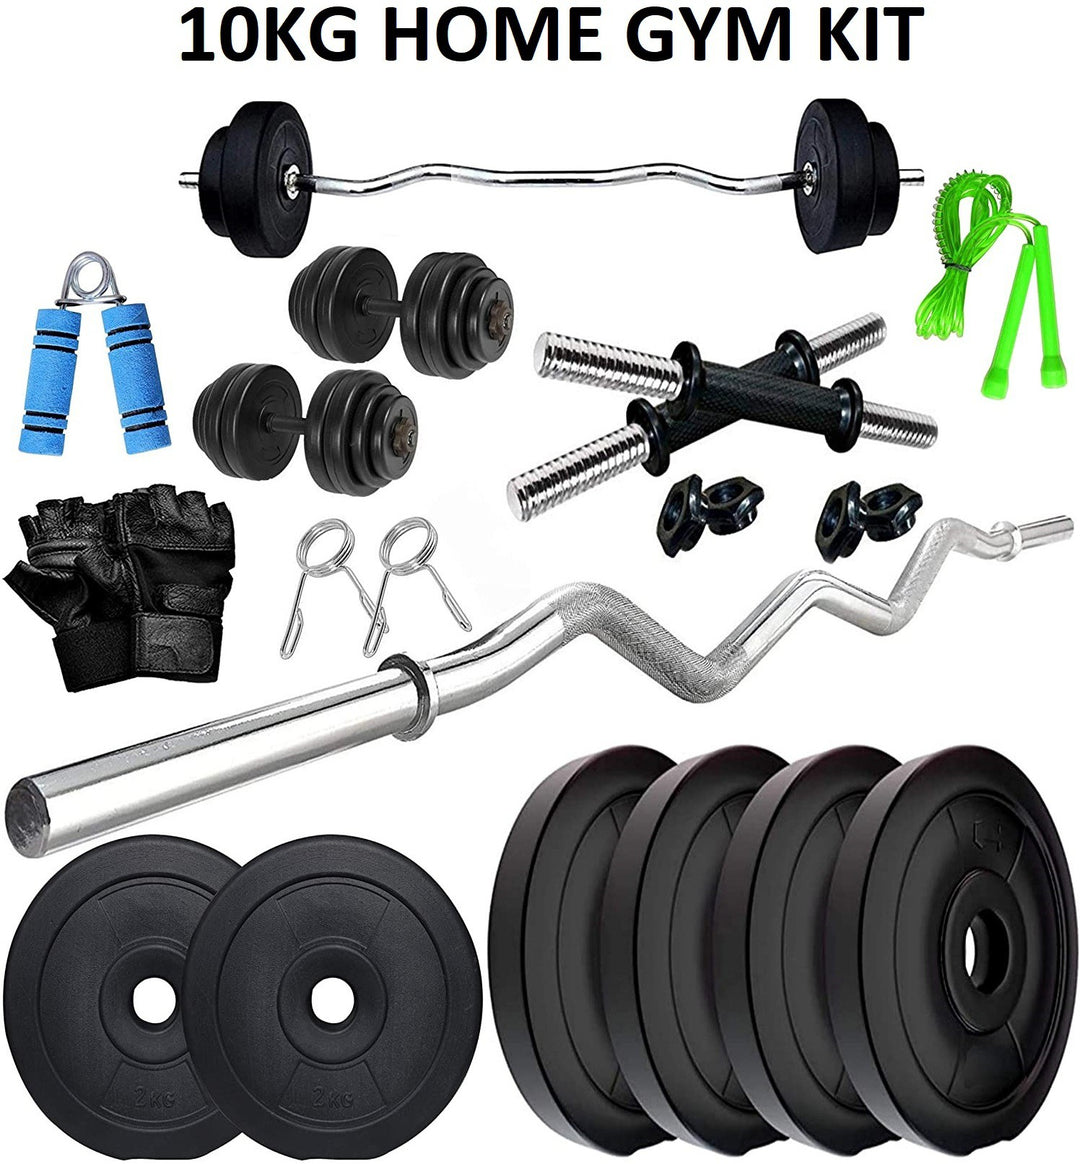 10KG Home Gym Set | Home Gym Equipments | Home Gym with 3ft Curl Rod + One Pair Dumbbell Rods | Home Gym Combo | PVC Weight Plates | Exercise Set | Home Gym Kit with Accessories